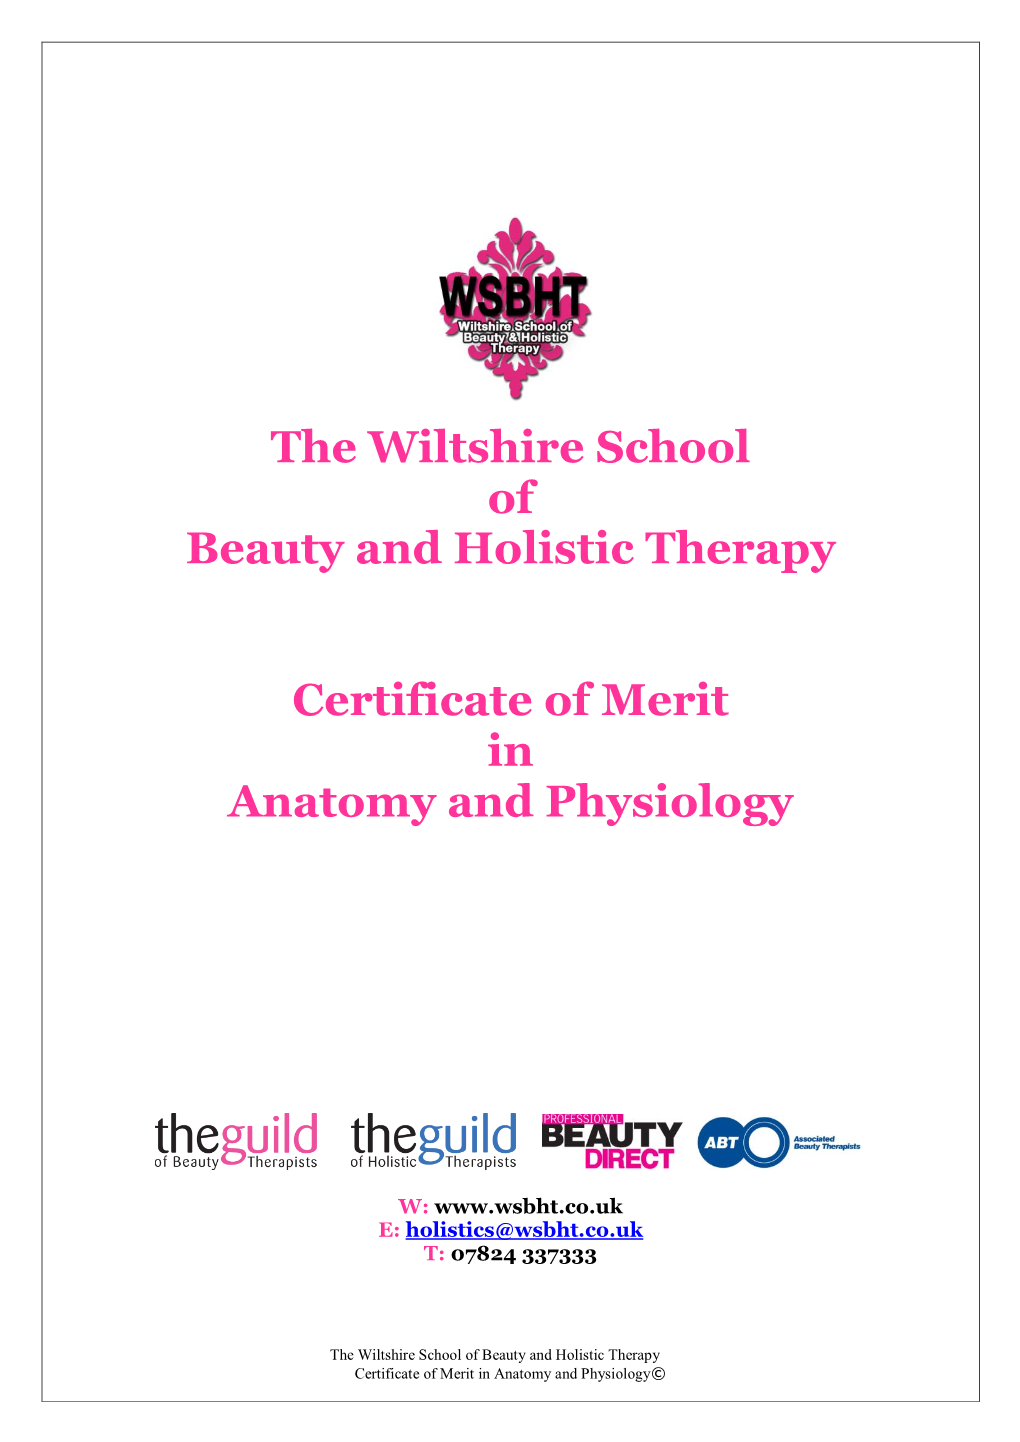 The Wiltshire School of Beauty and Holistic Therapy Certificate of Merit in Anatomy and Physiology©